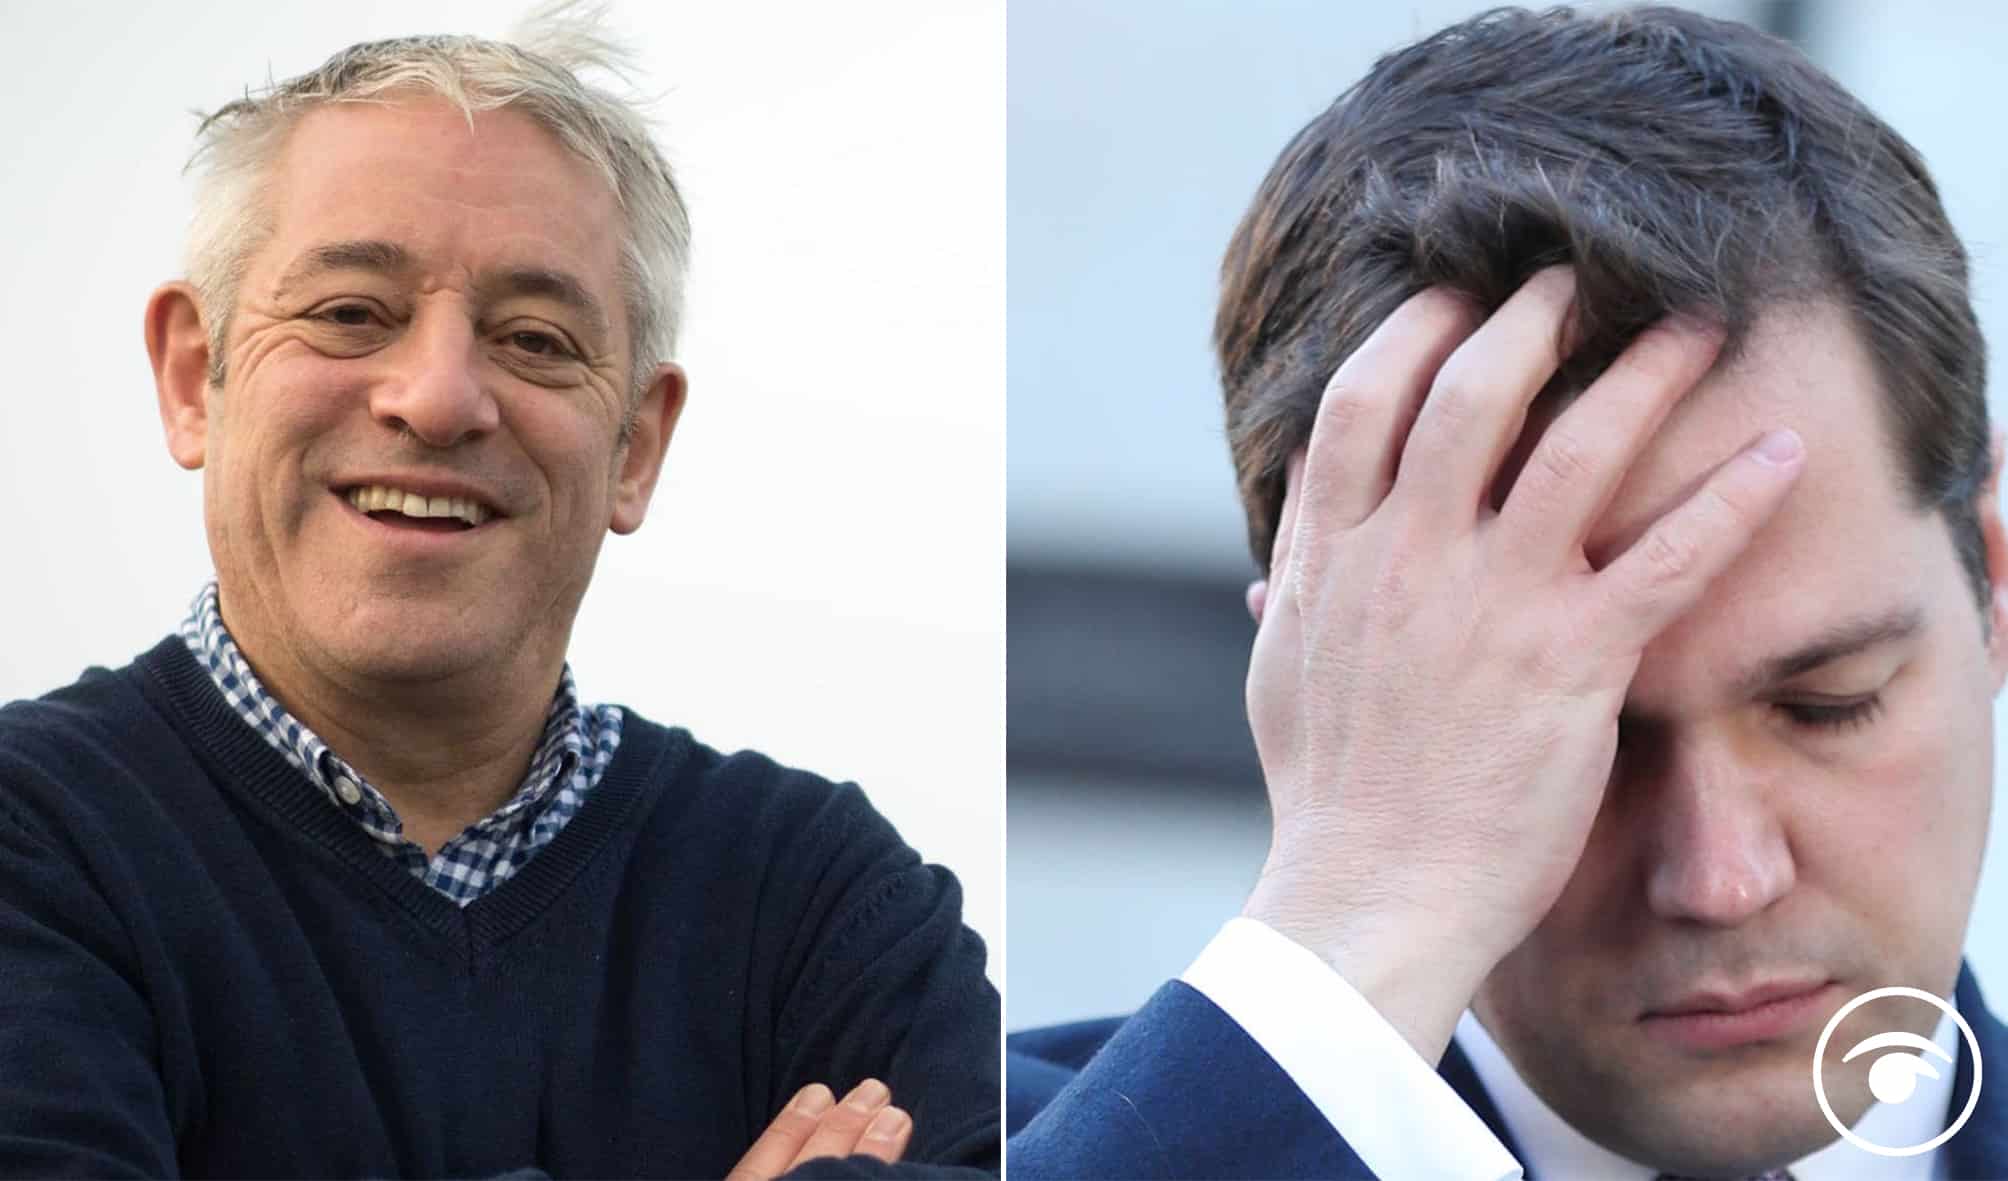 Watch – Reactions as Bercow owns Jenrick and slams ‘gunboat diplomacy’ after Navy sent to Jersey